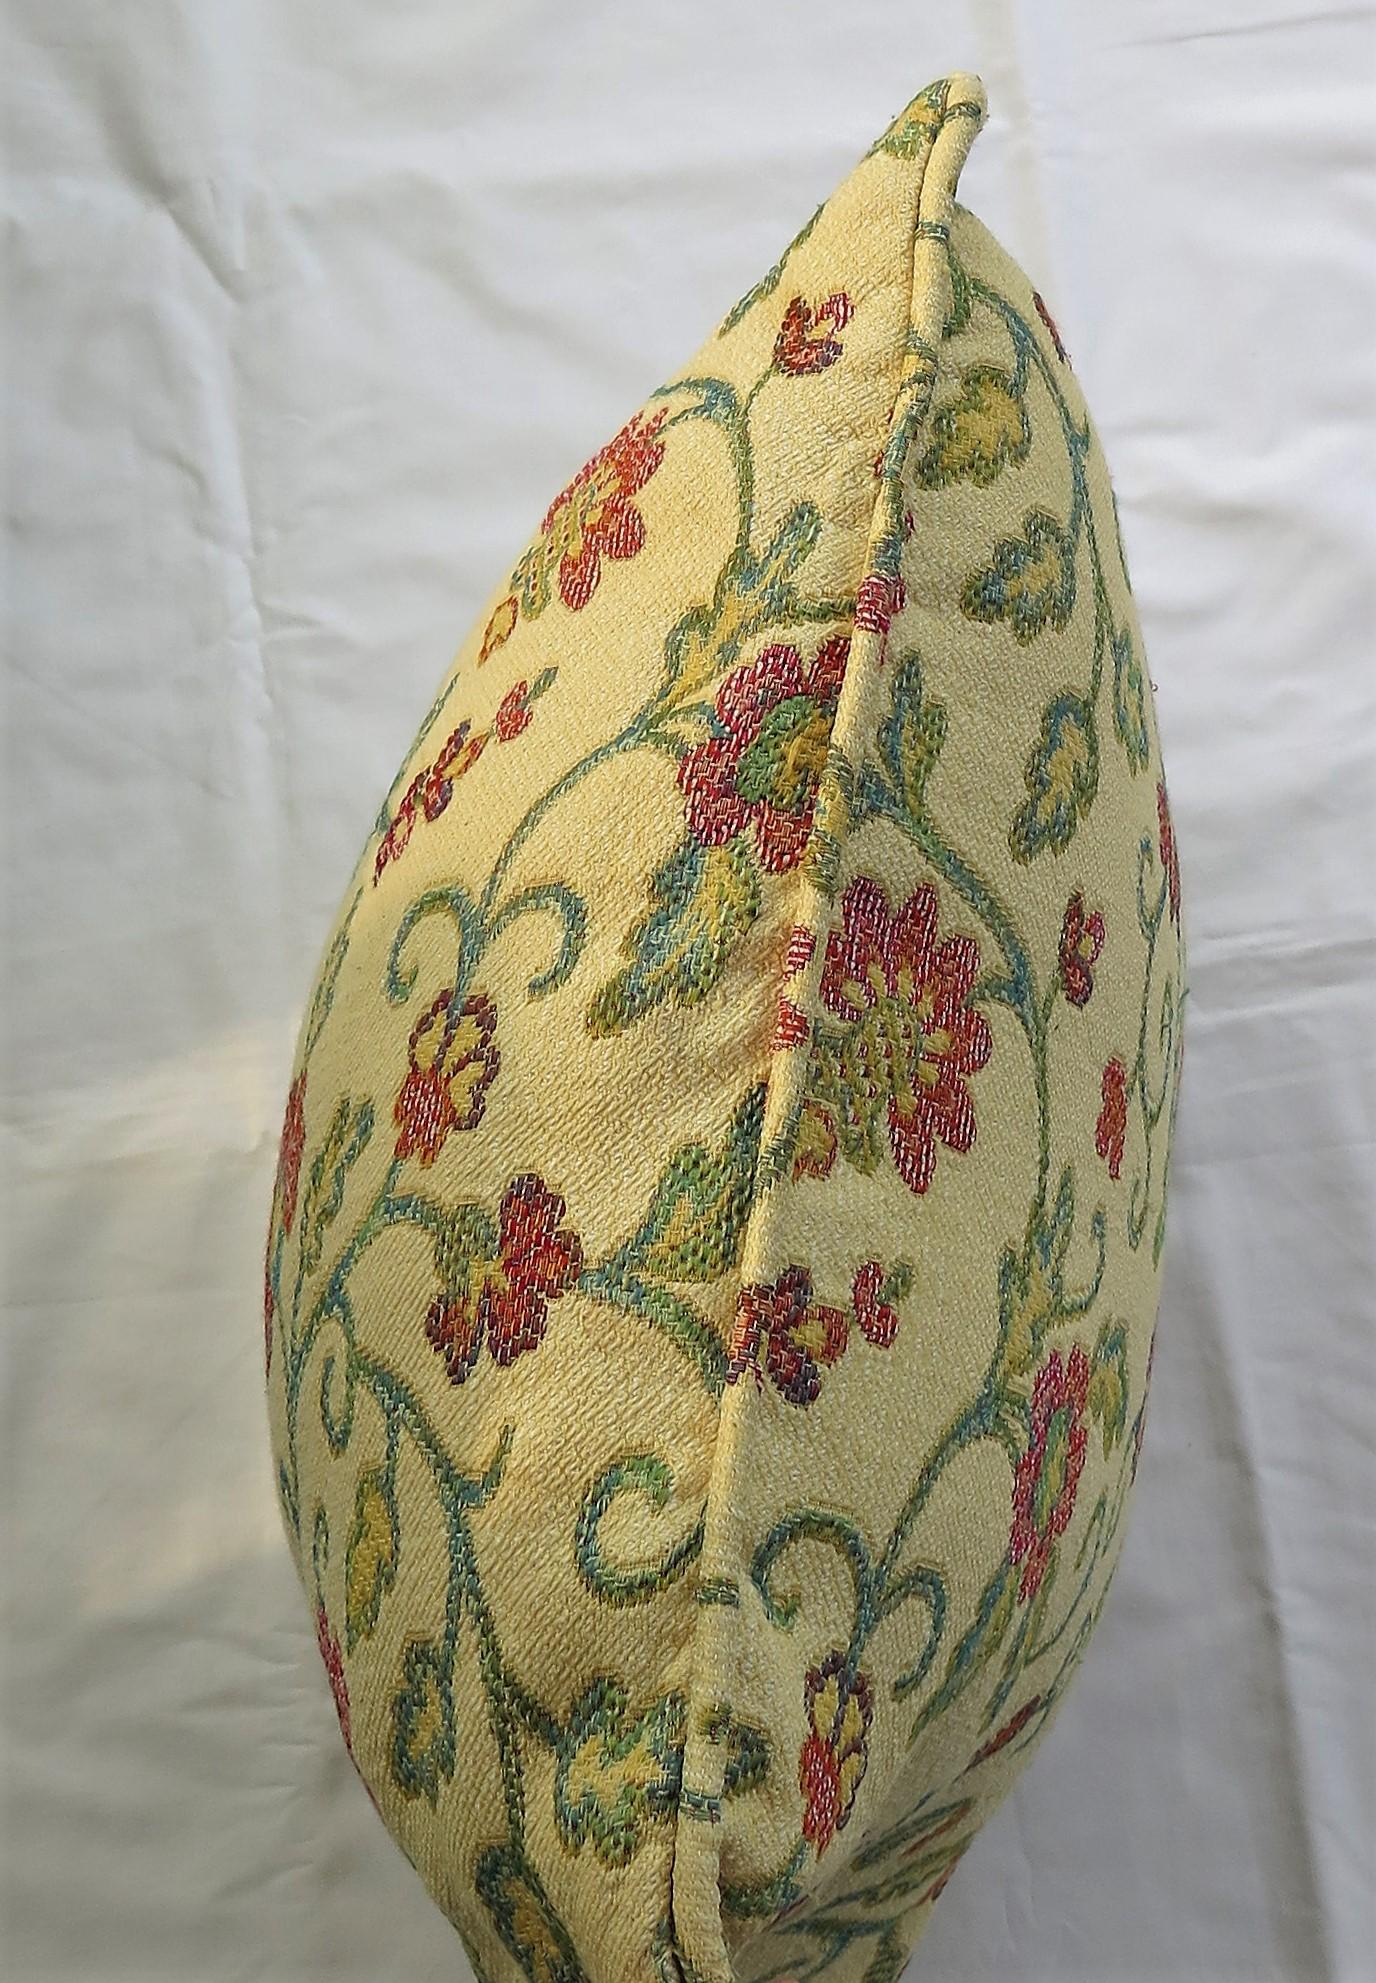 Woven Cushion or Pillow in Art Nouveau Floral Vine Style, 20th Century ...